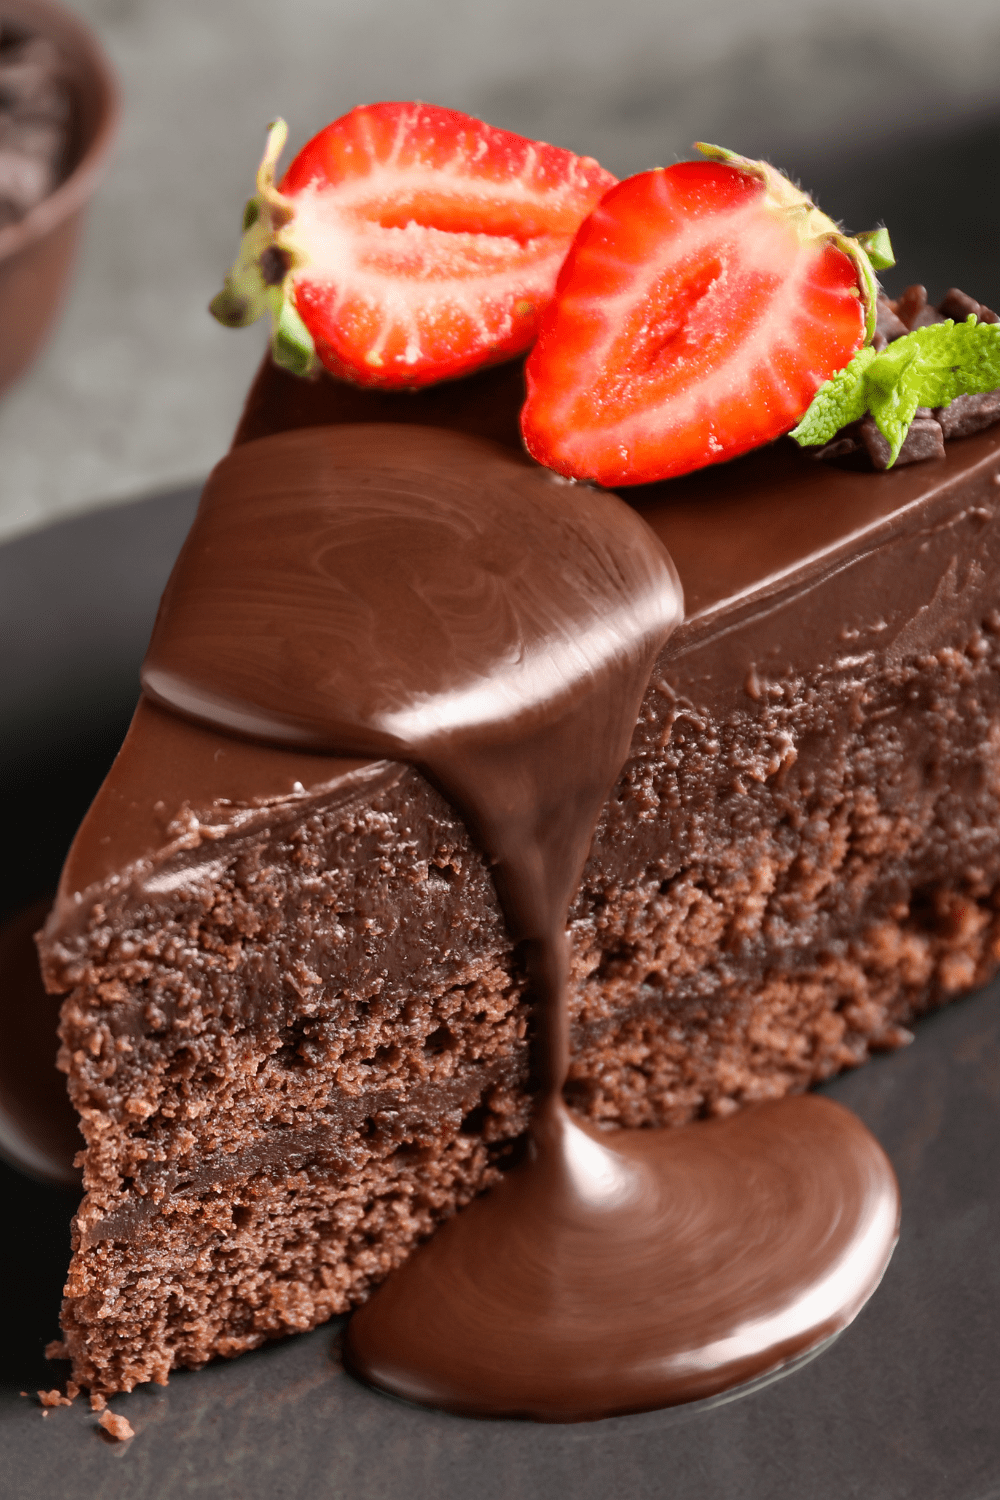 A slice of chocolate cake with strawberry and chocolate syrup